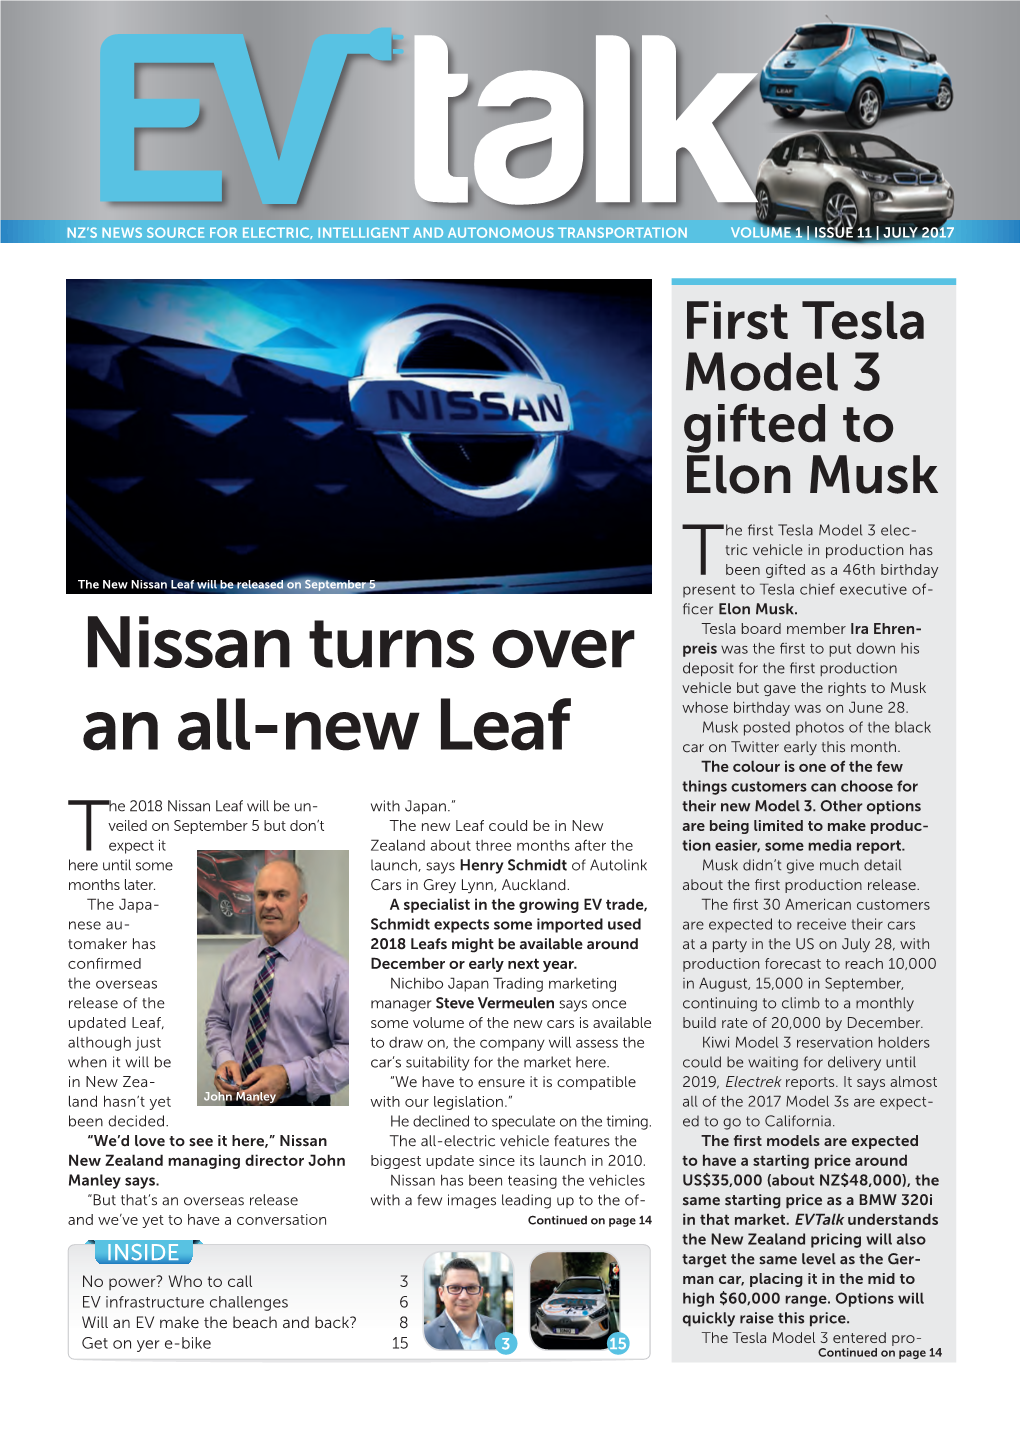 Nissan Turns Over an All-New Leaf